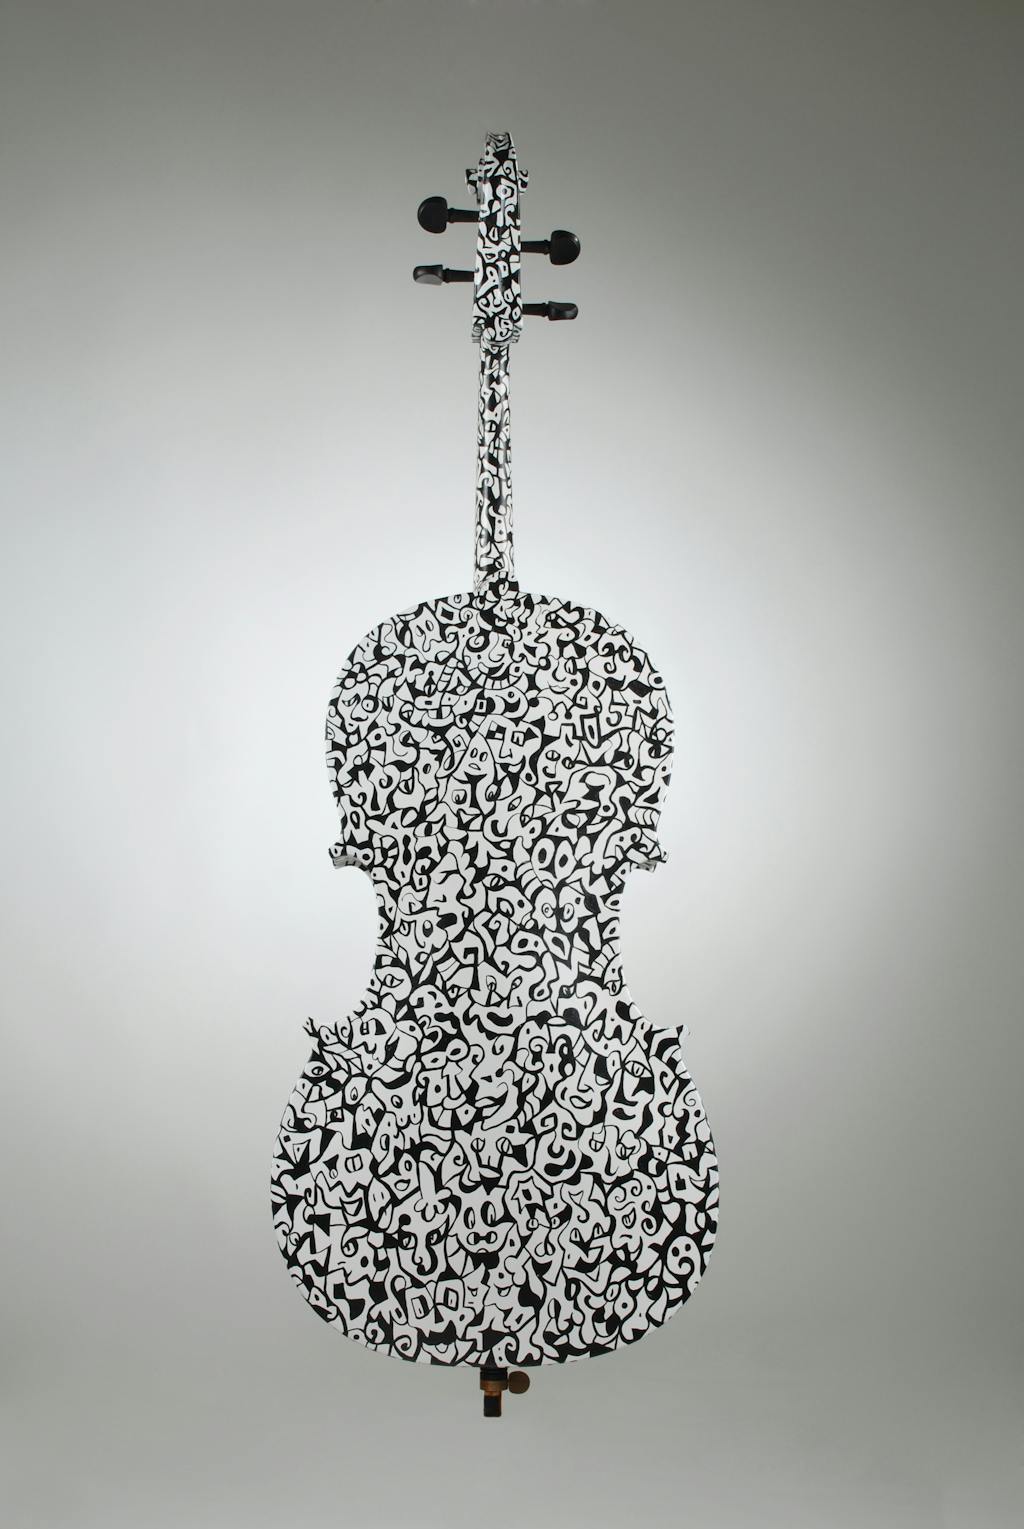 Cello "Badinerie", painted by Elena Birkenwald in 2000